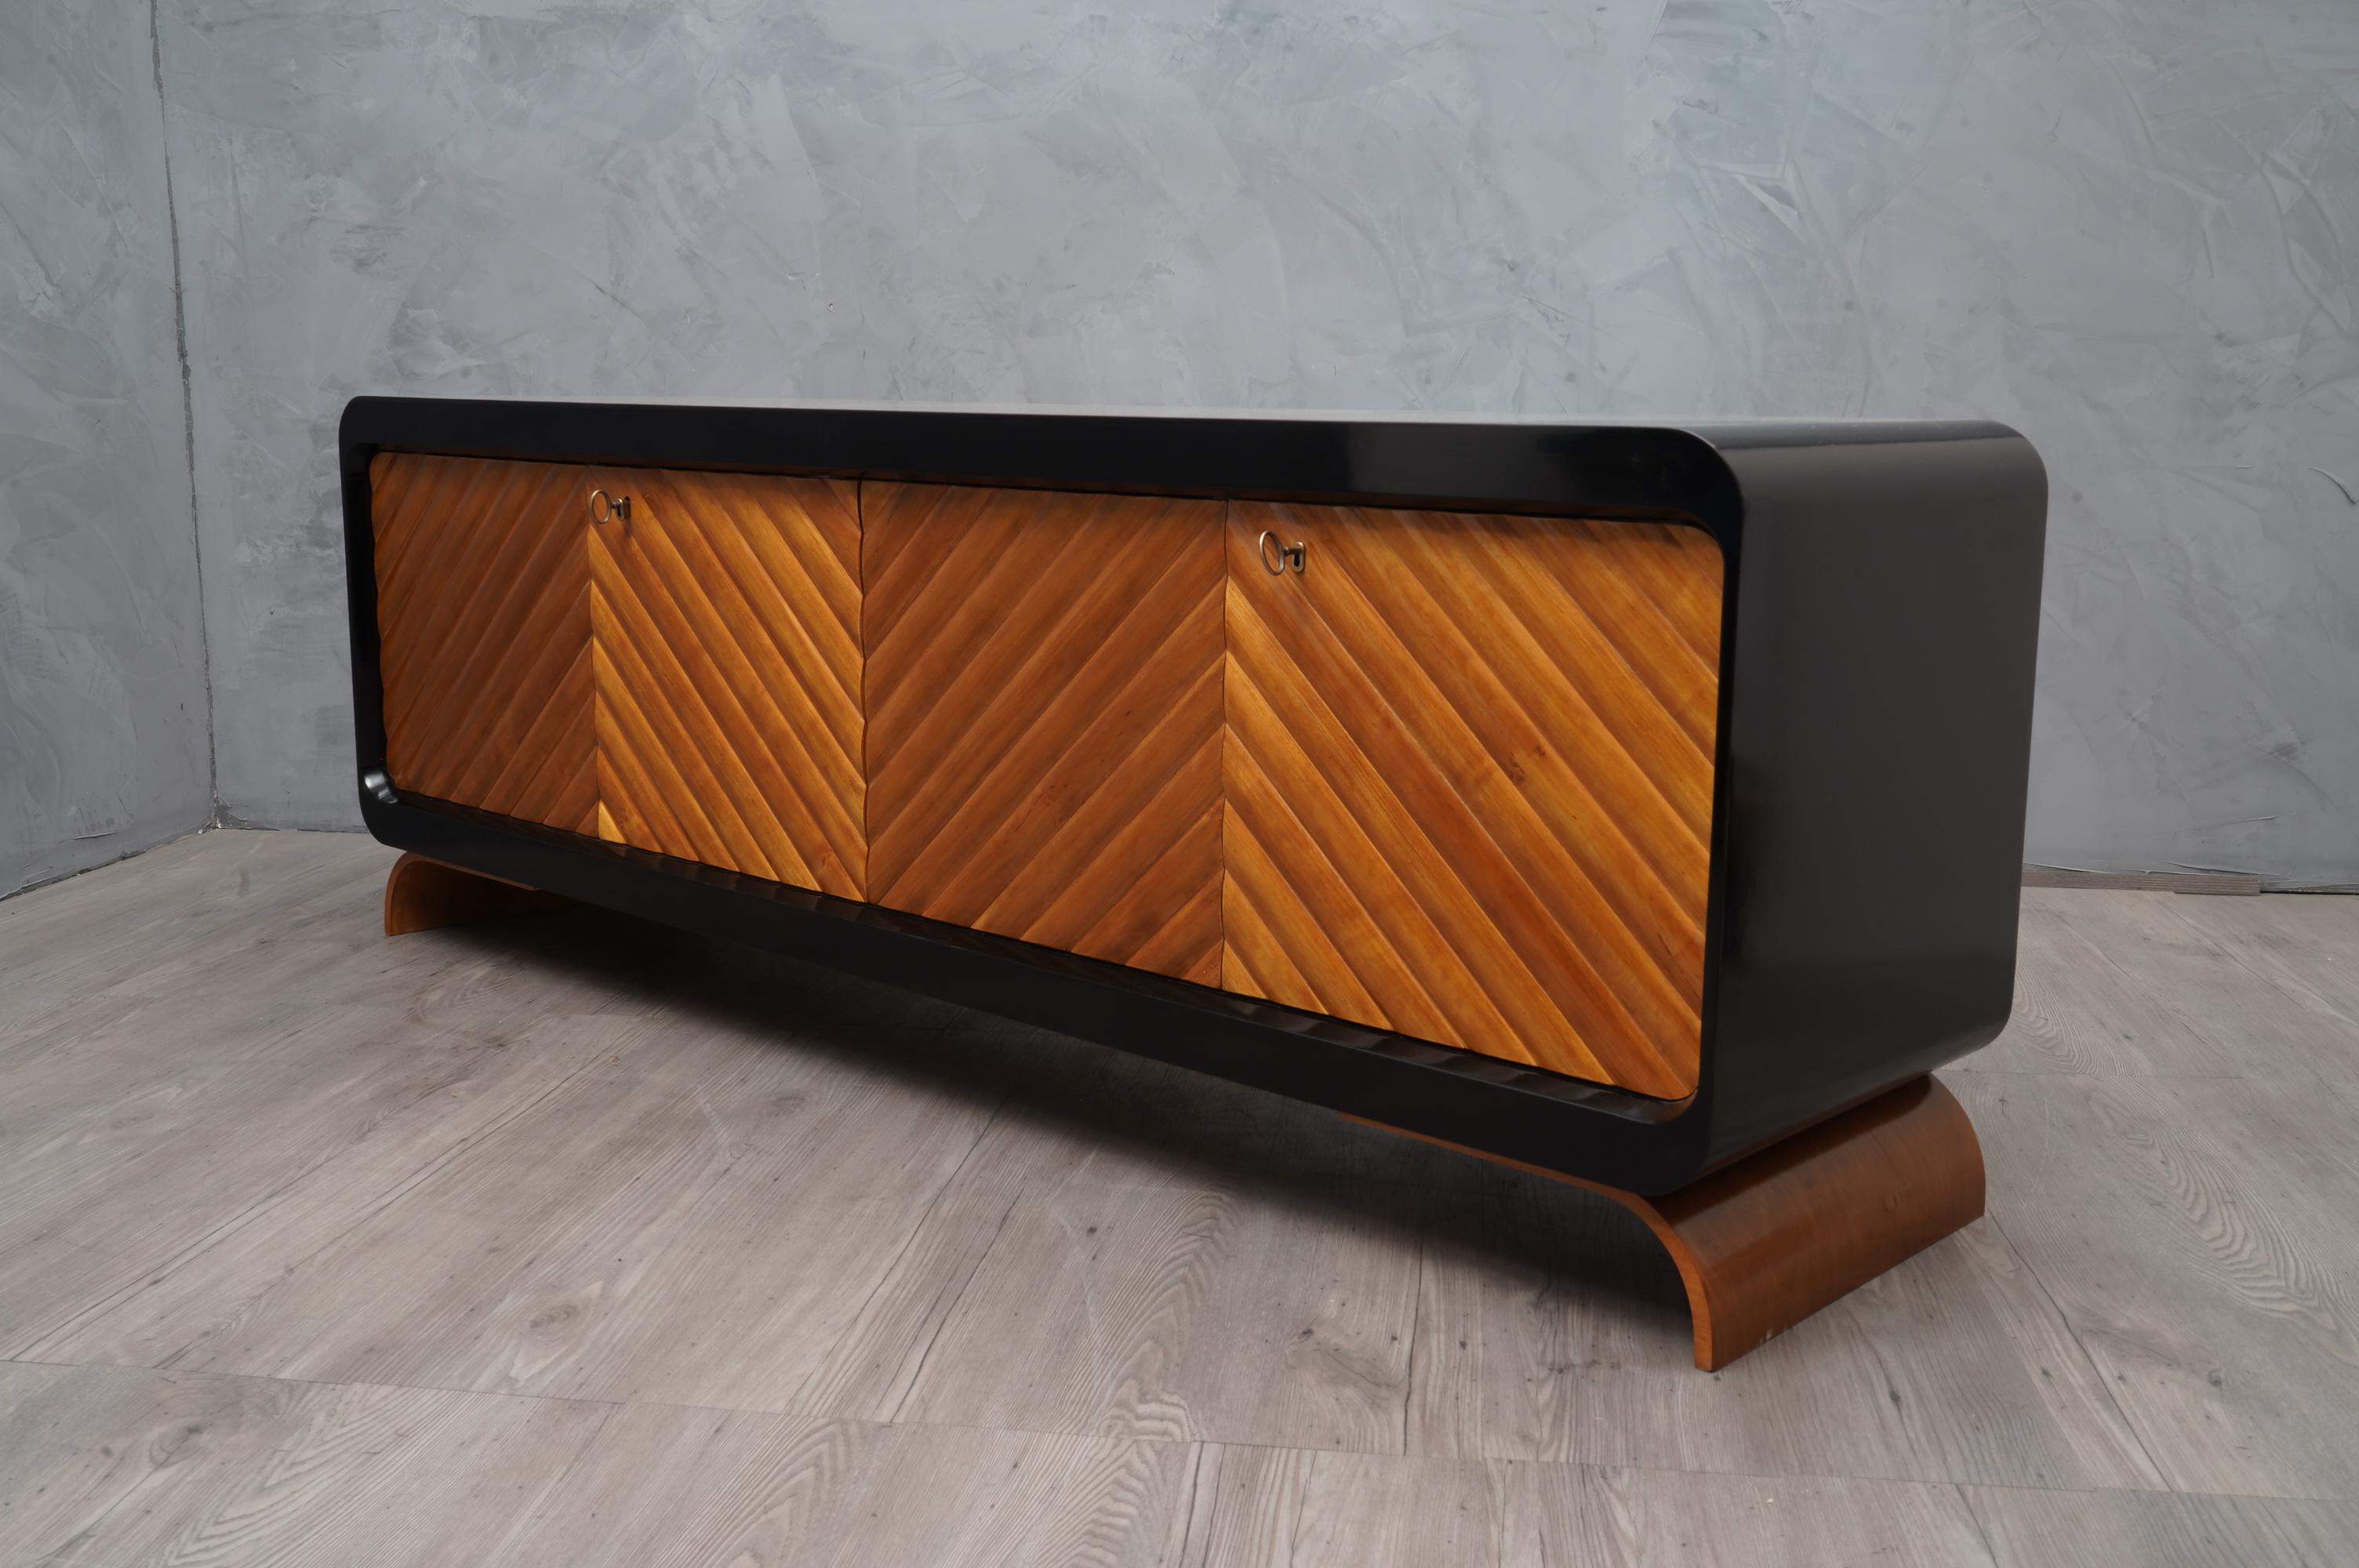 Special design with very pronounced rounded shapes with doors that form a herringbone pattern. Precious materials.

The sideboard has a smooth and well-polished black top, this does not end like a normal straight sideboard with an edge but continues